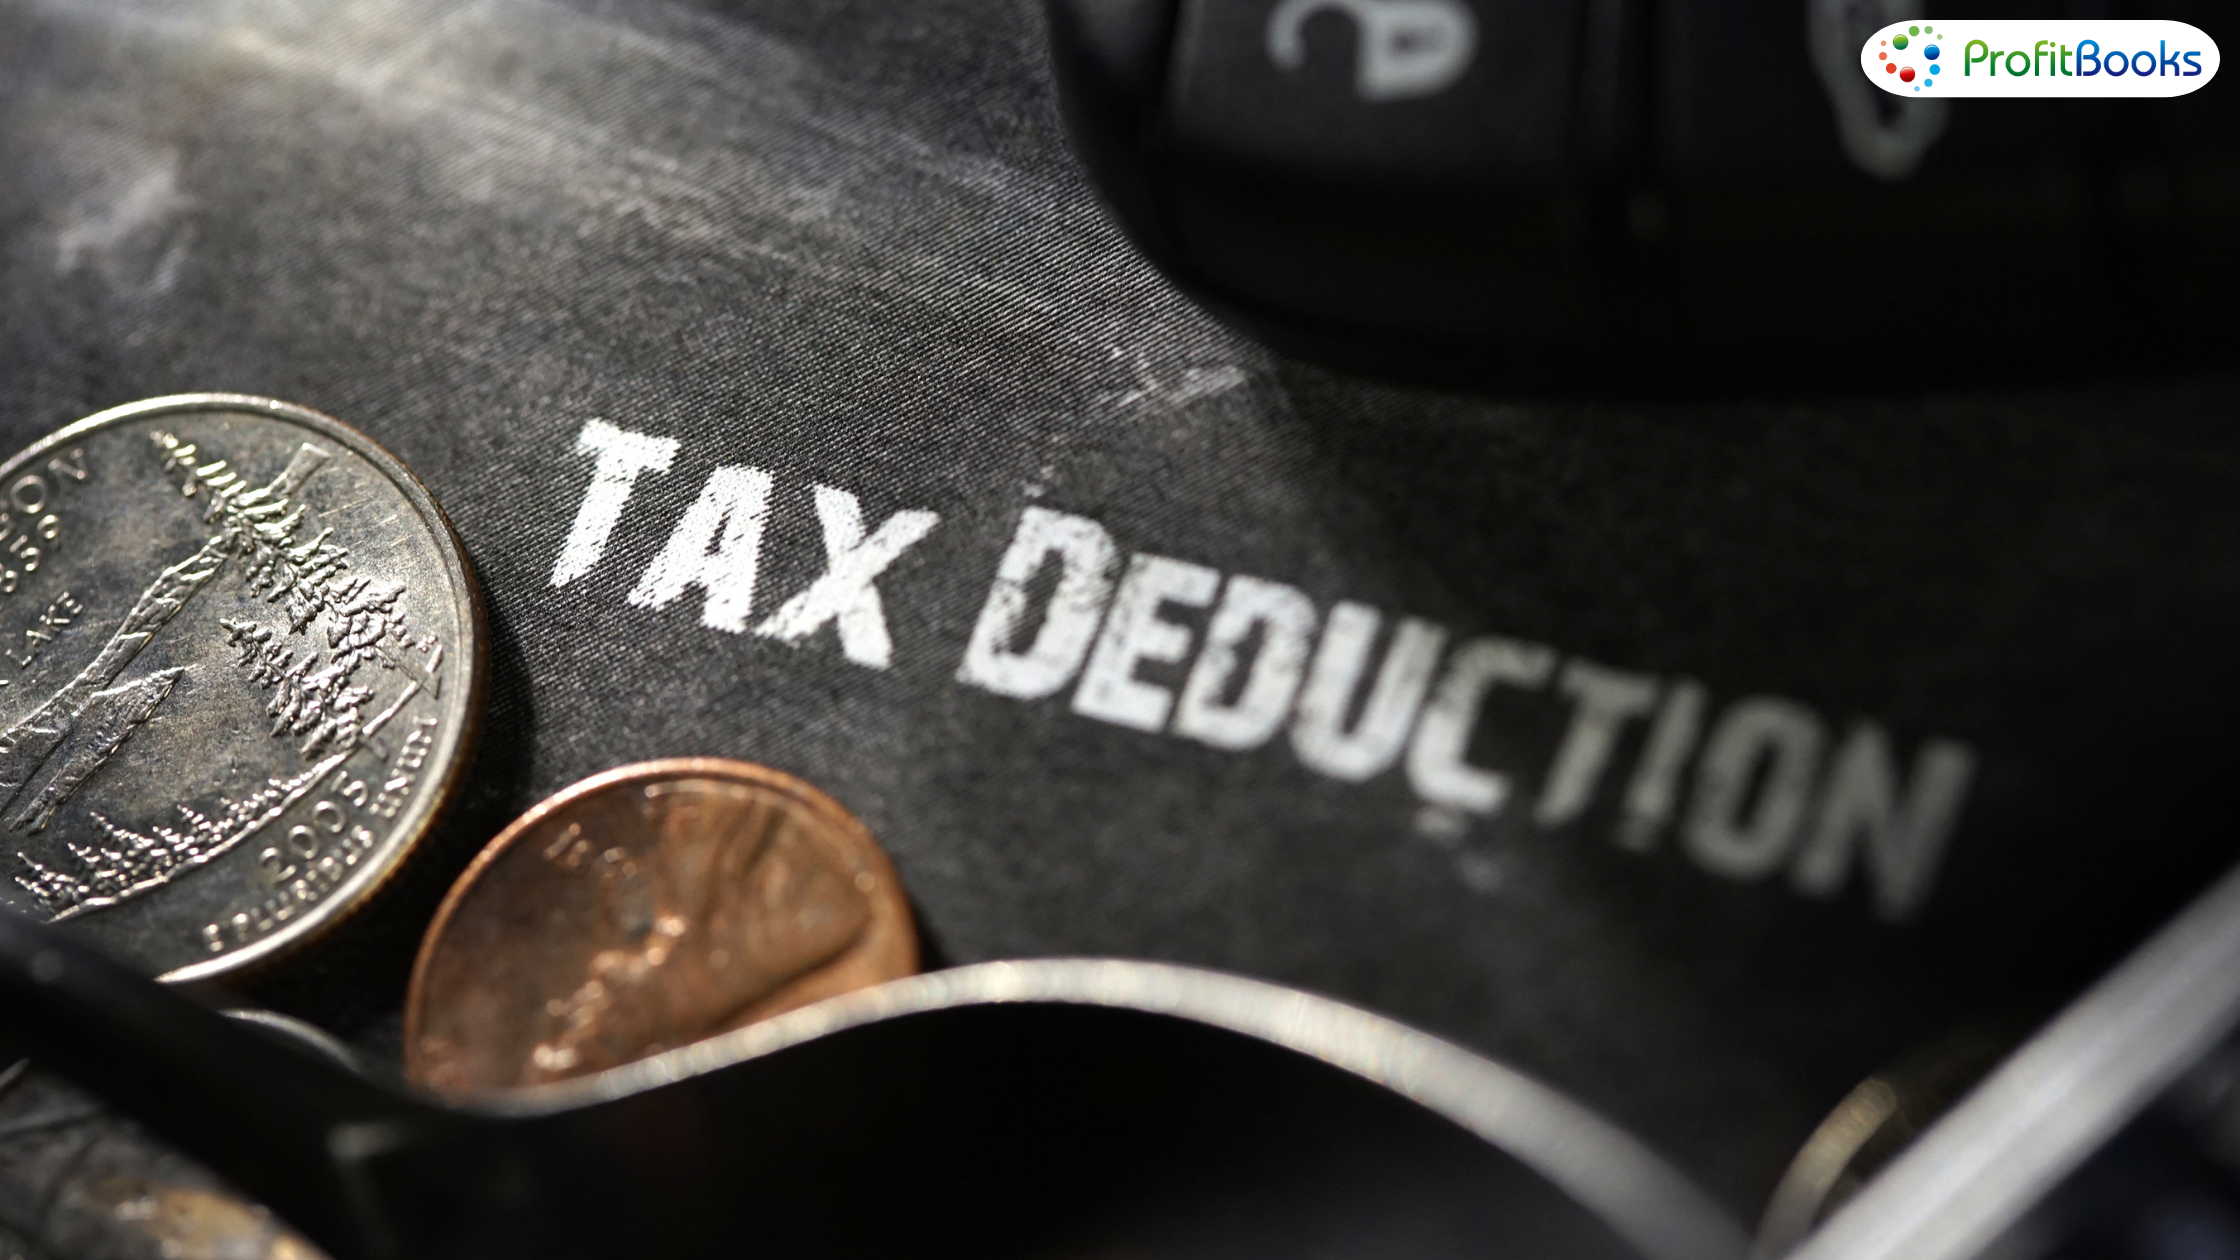 Tax deductions for small businesses